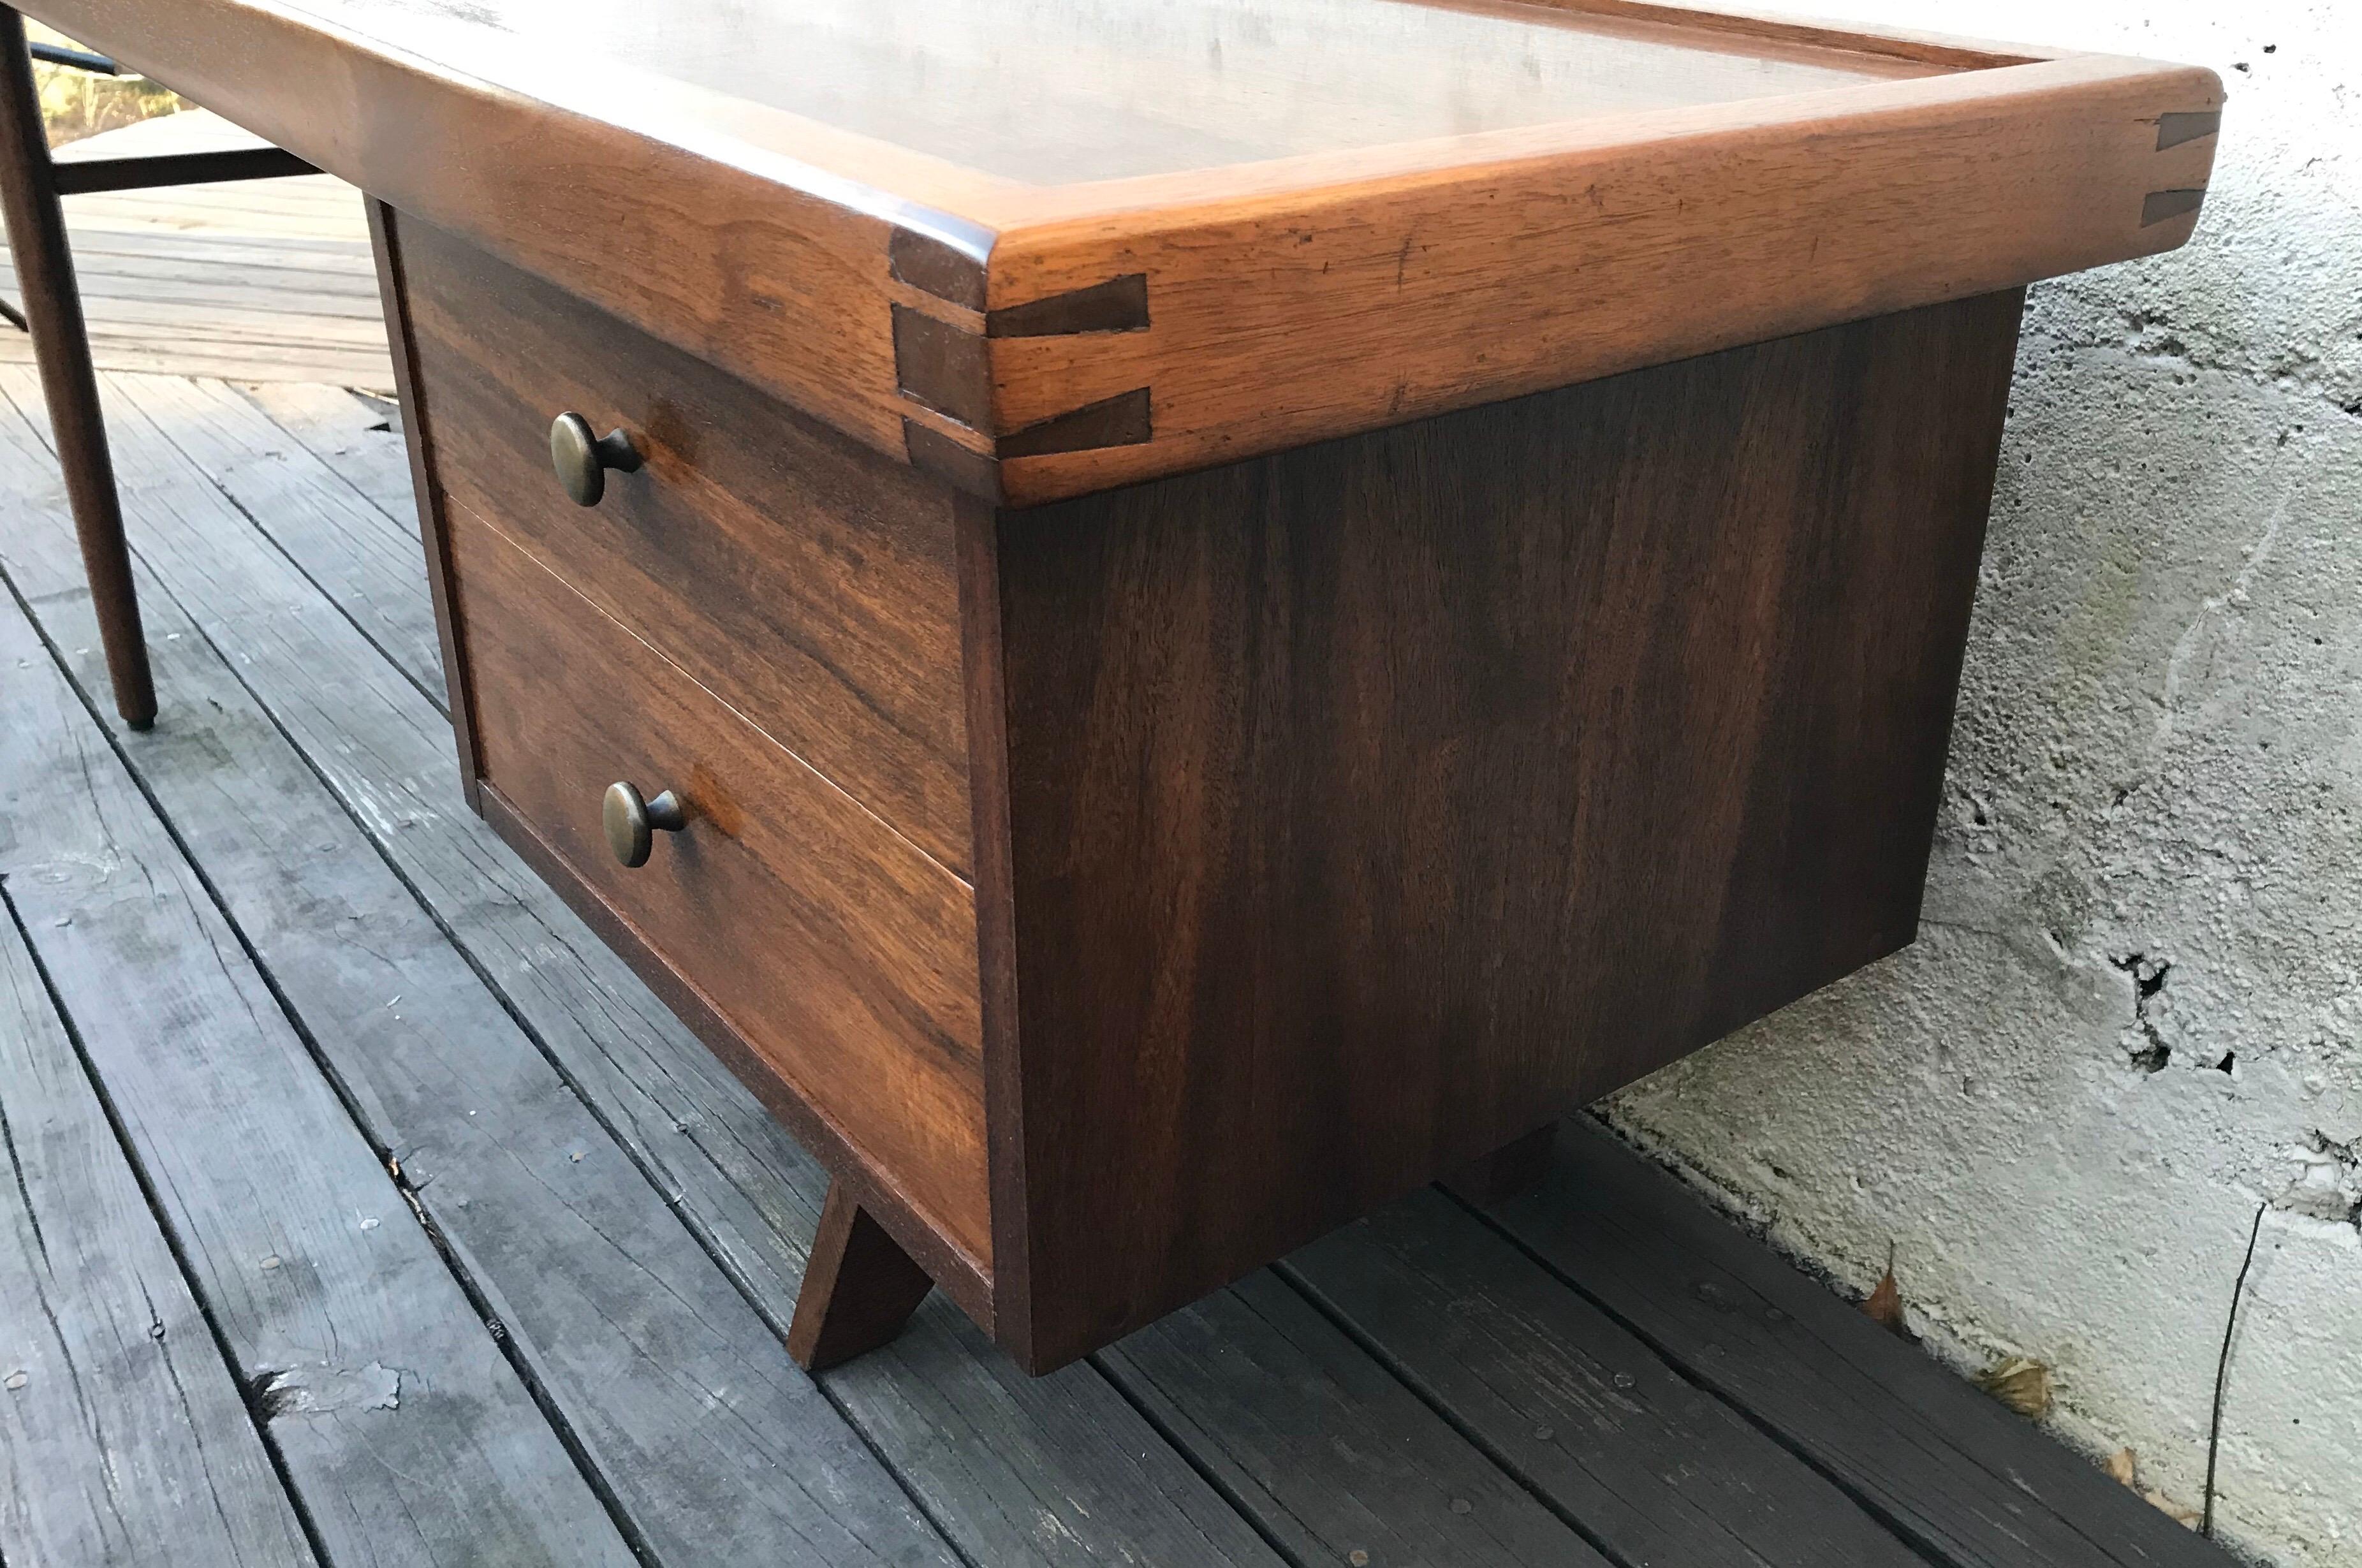 A highly sought after coffee table by George Nakashima for Widdicomb, 1963. Beautiful condition, professionally restored.

George Nakashima worked for Widdicomb, from the mid-1950s to early 1960s. The 